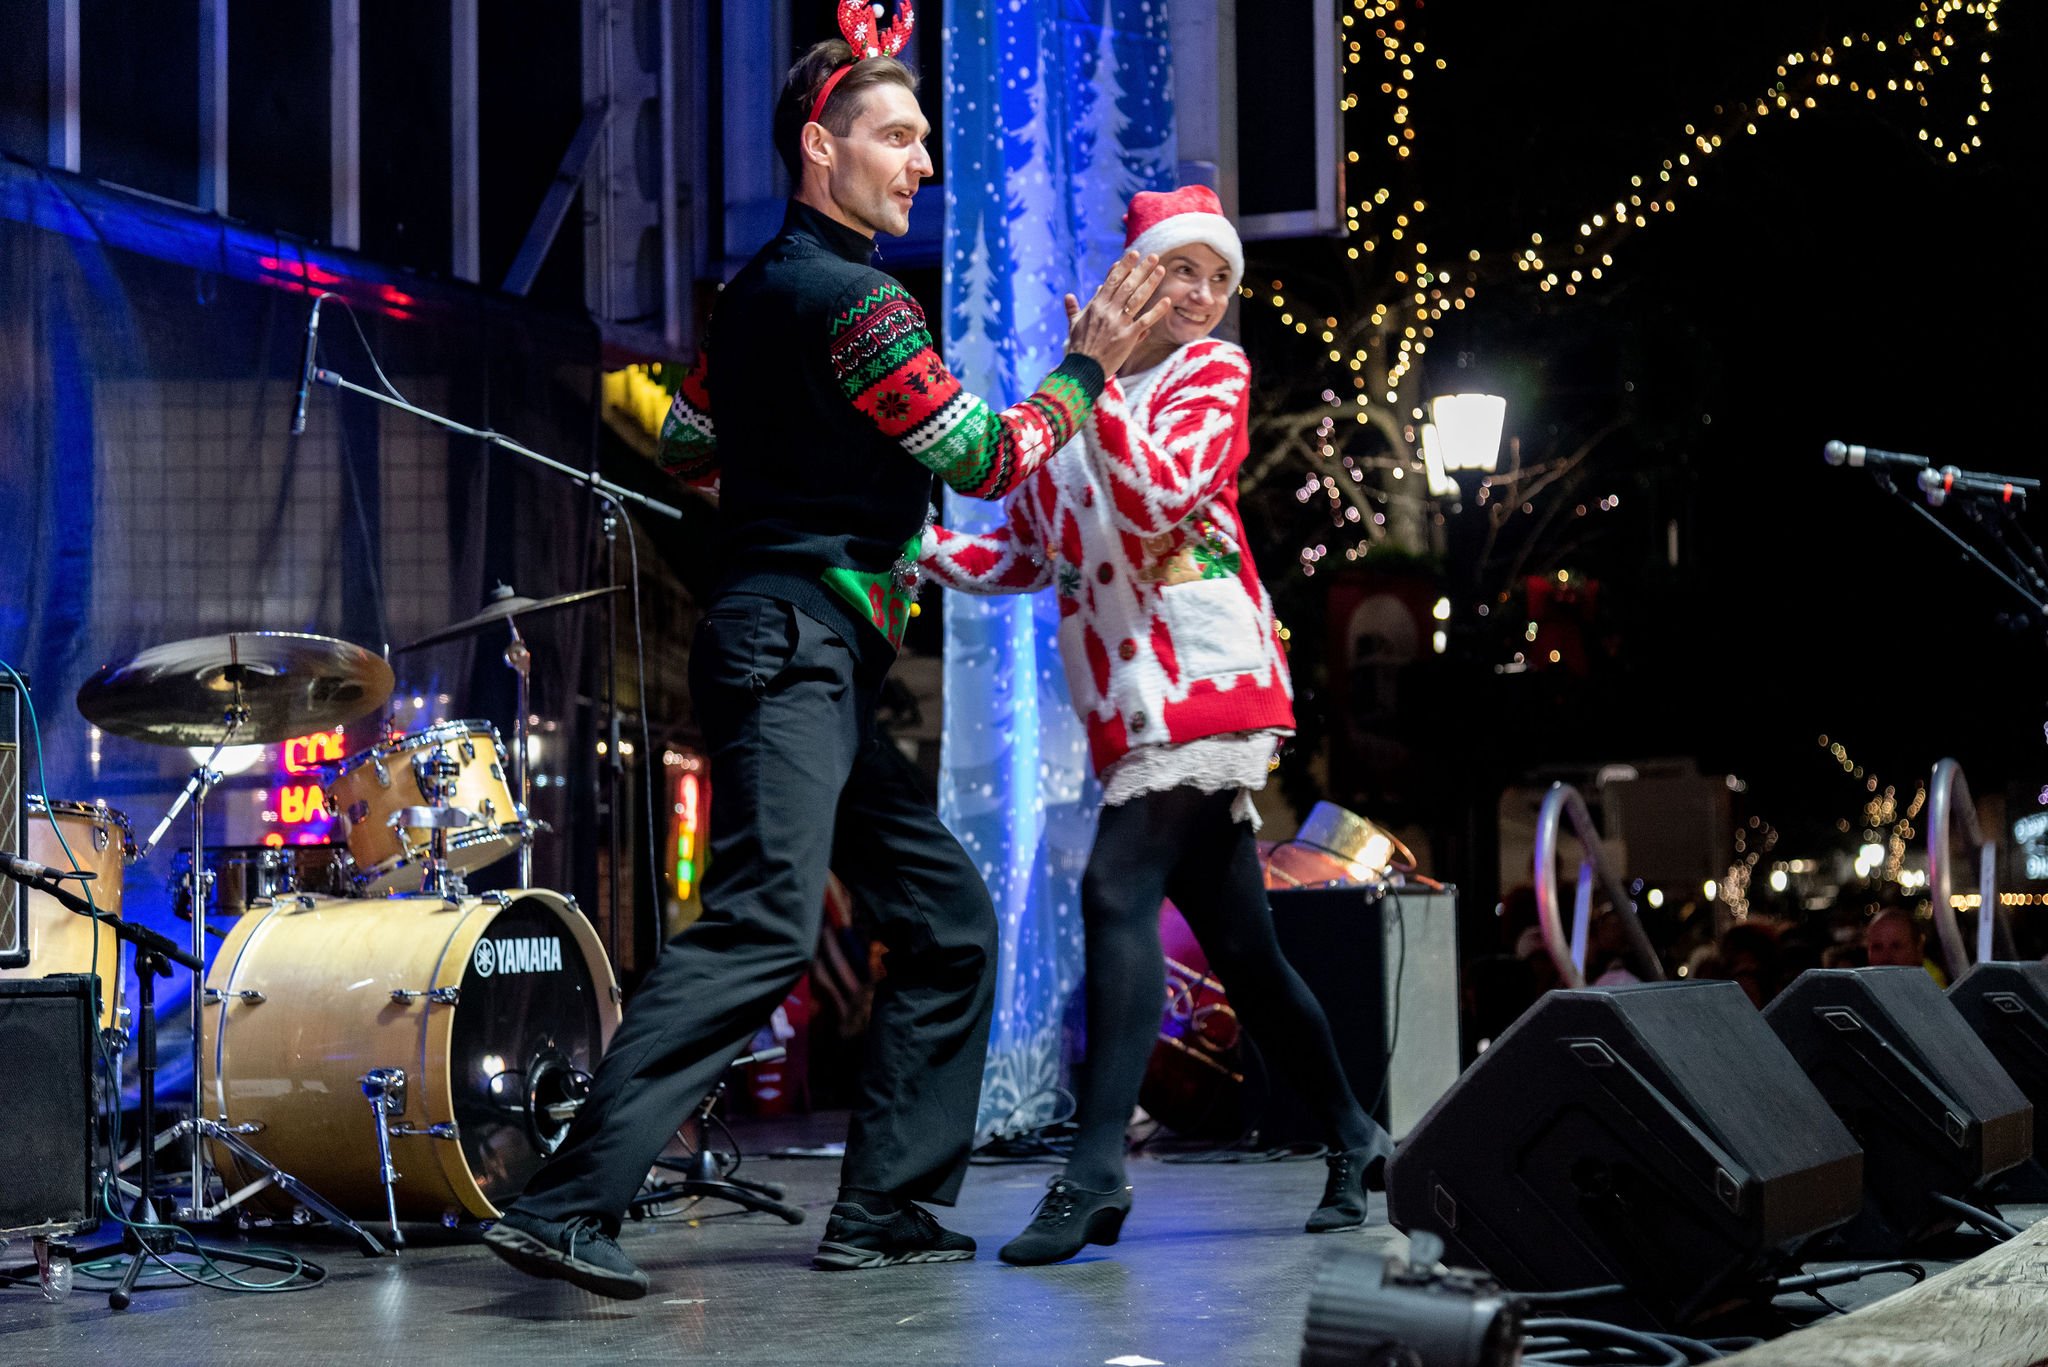 Professional Dancers dancing on stage at an outdoor downtown Holiday event (Copy)